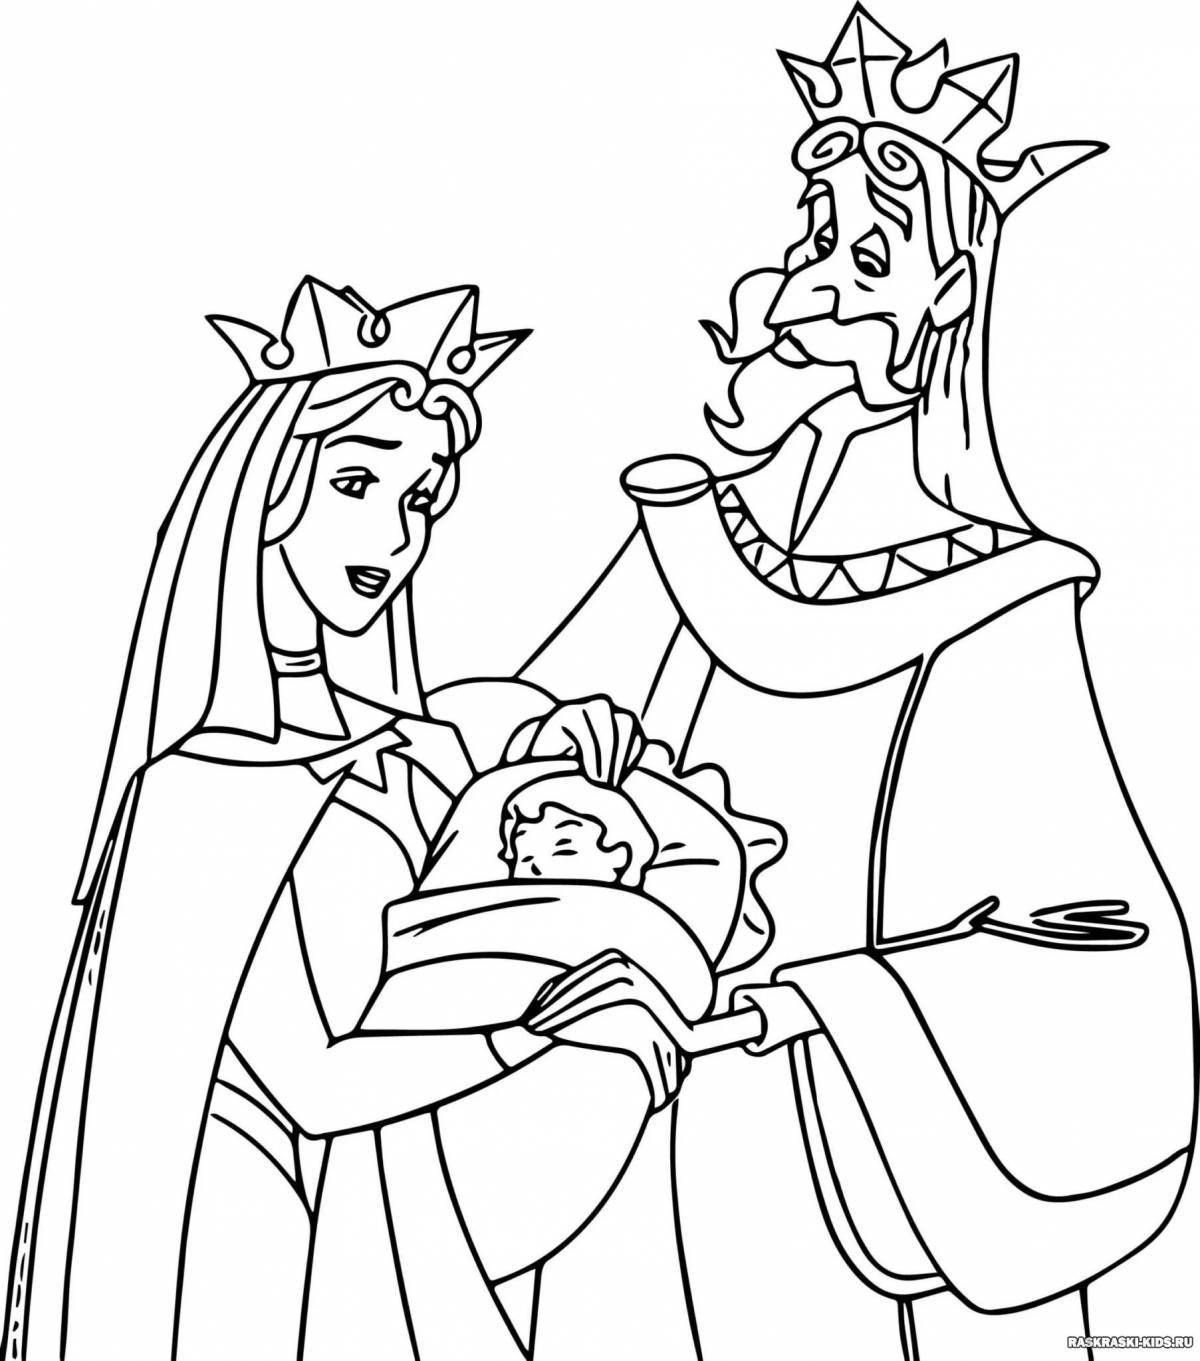 Sleeping Beauty coloring book for kids